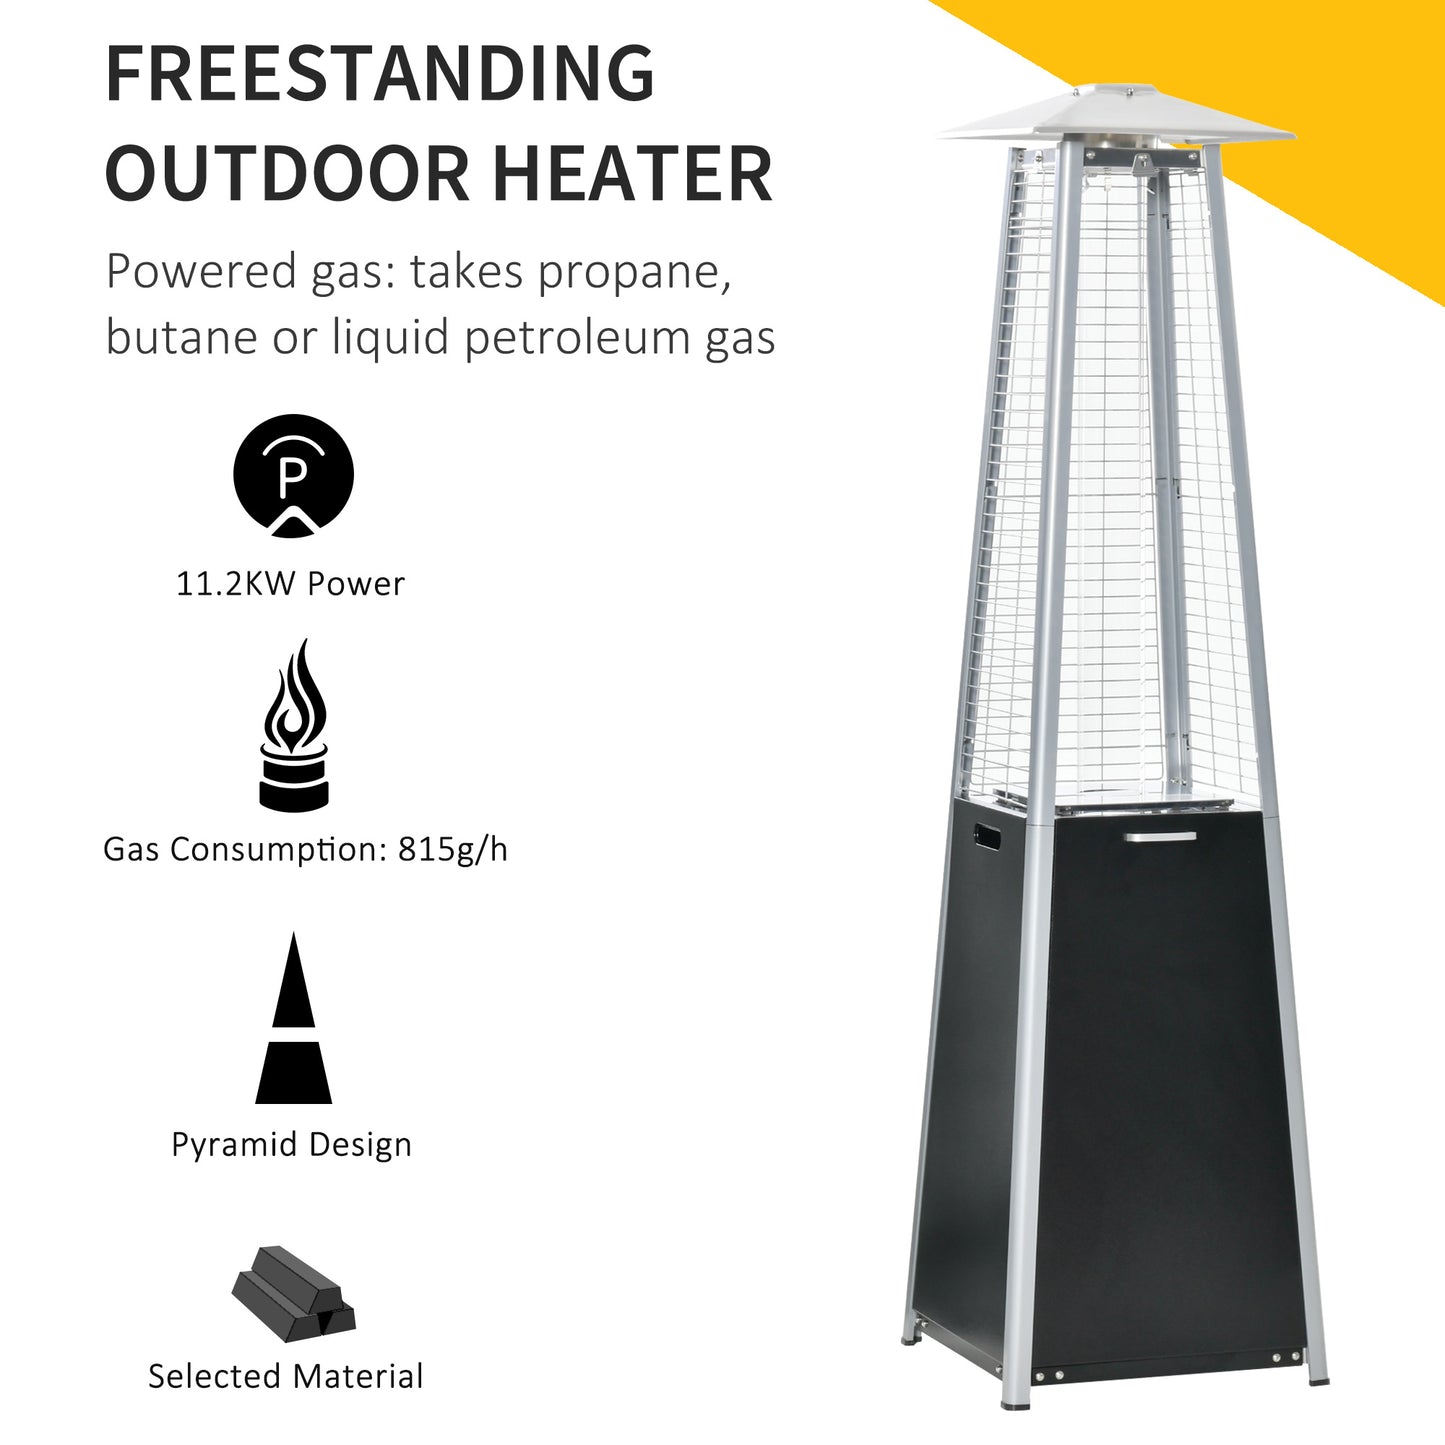 Outsunny 11.2KW Outdoor Patio Gas Heater Freestanding Pyramid Propane Heater Garden Tower Heater with Wheels, Dust Cover, Black, 50 x 50 x 190cm